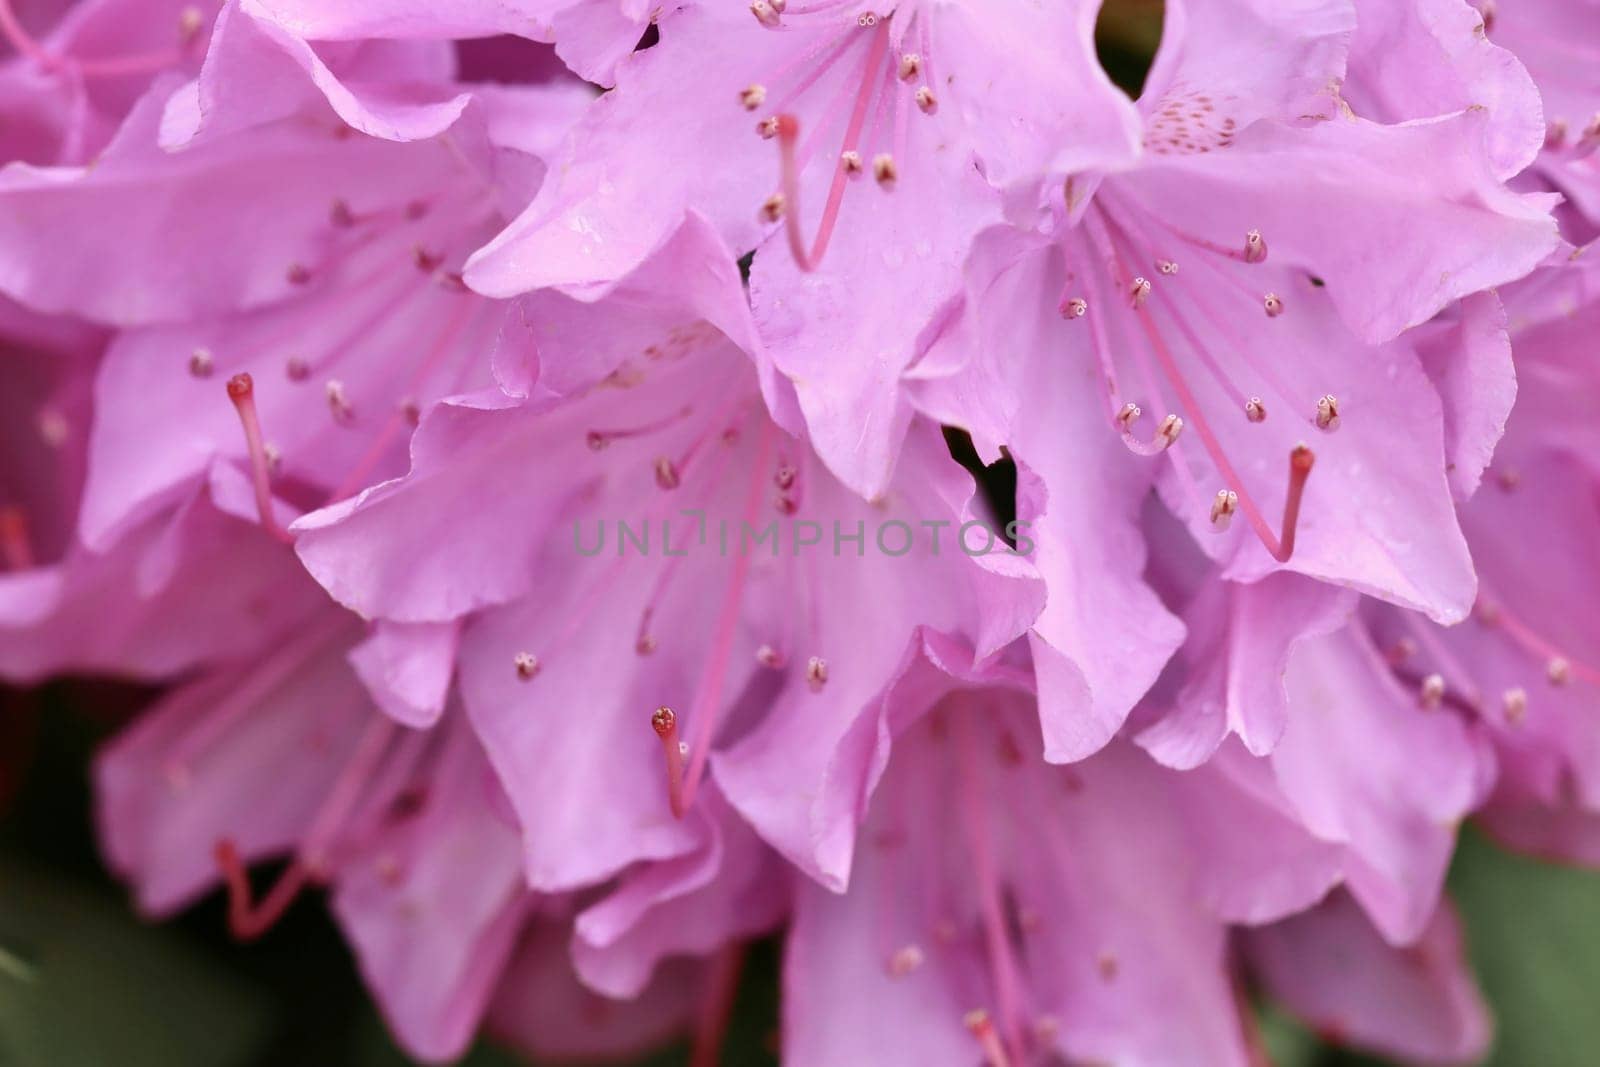 Pink Rhododendron flower petals. Floral background by Olayola